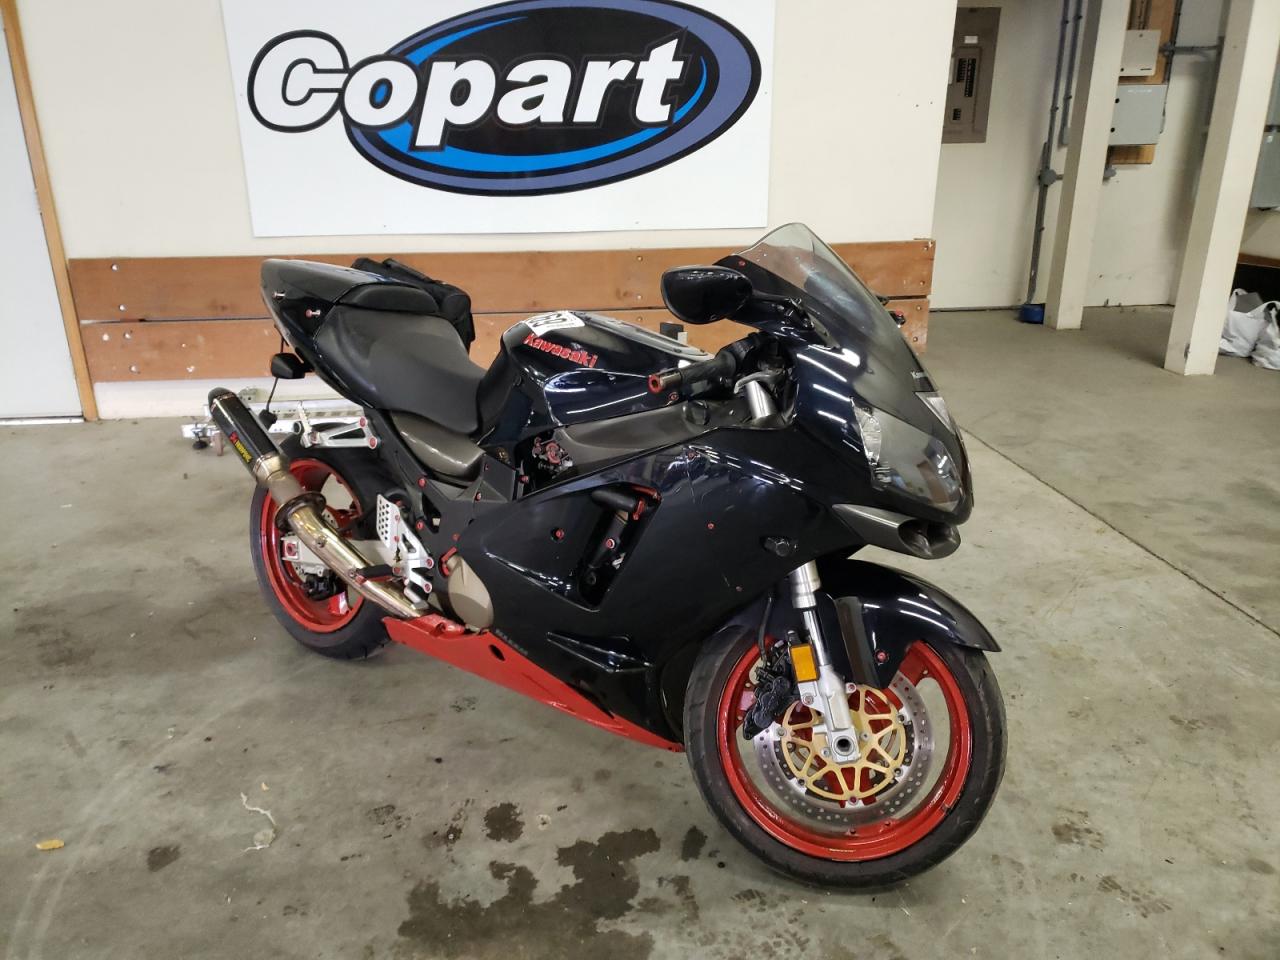 2002 Kawasaki ZX1200 B for sale at Copart Portland, OR. Lot 